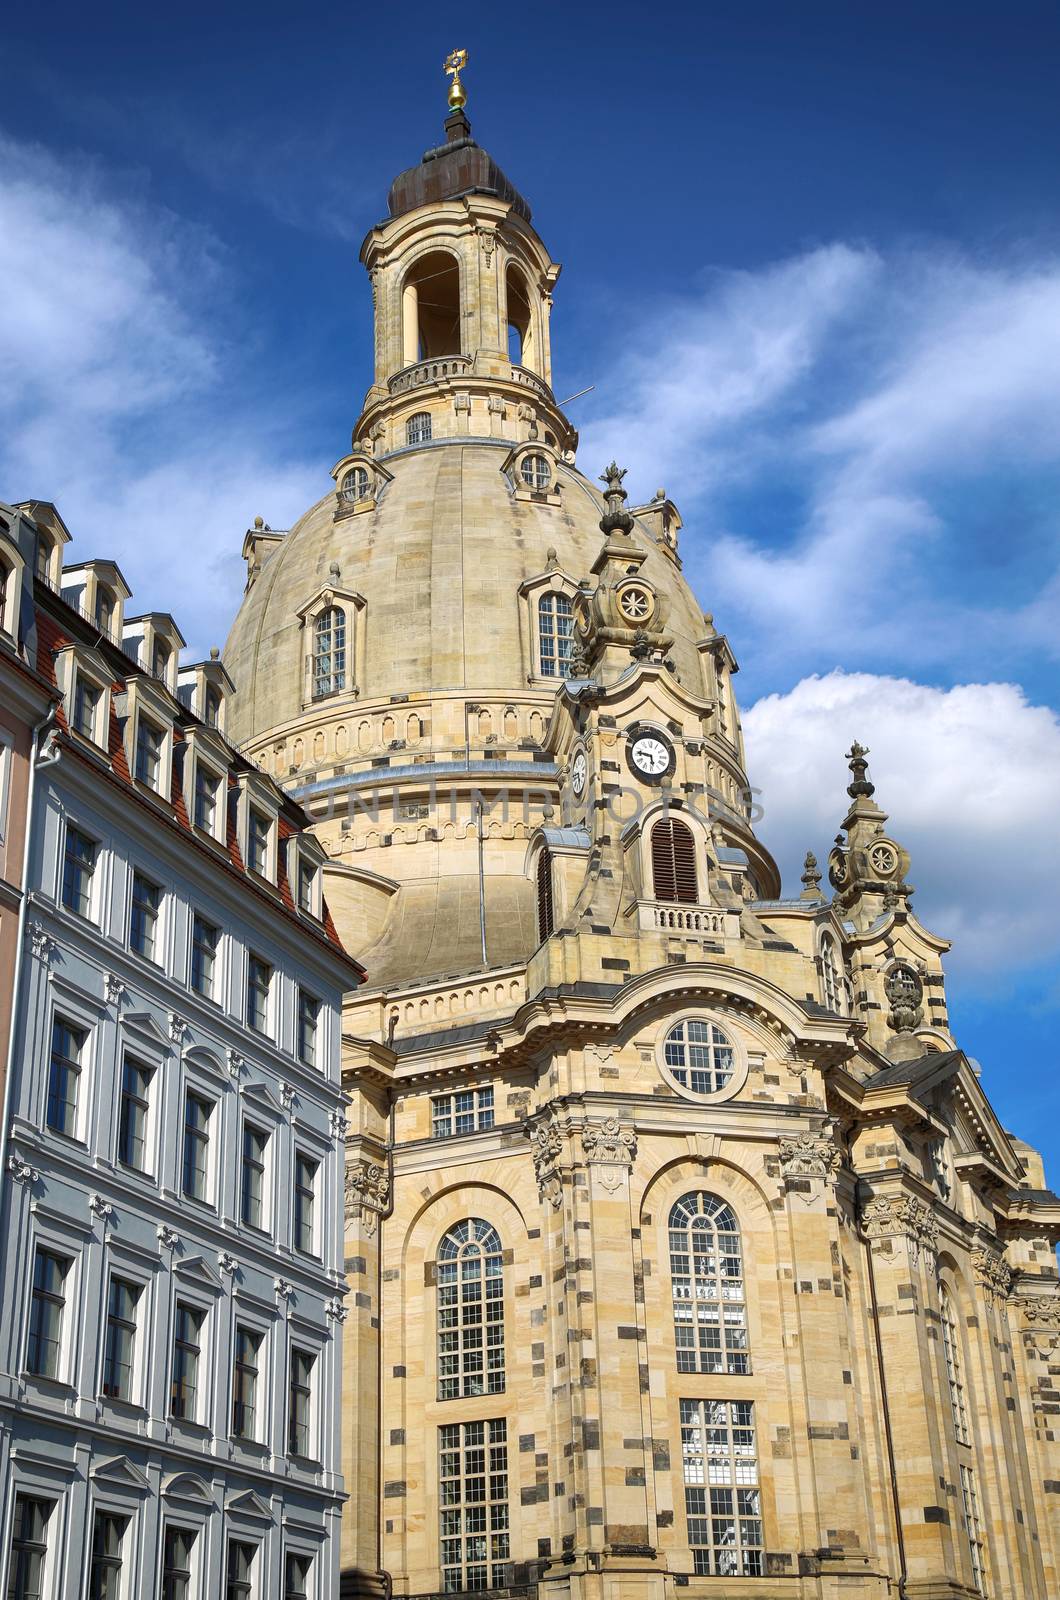 Neumarkt Square at Frauenkirche (Our Lady church) in the center of Old town in Dresden, Germany